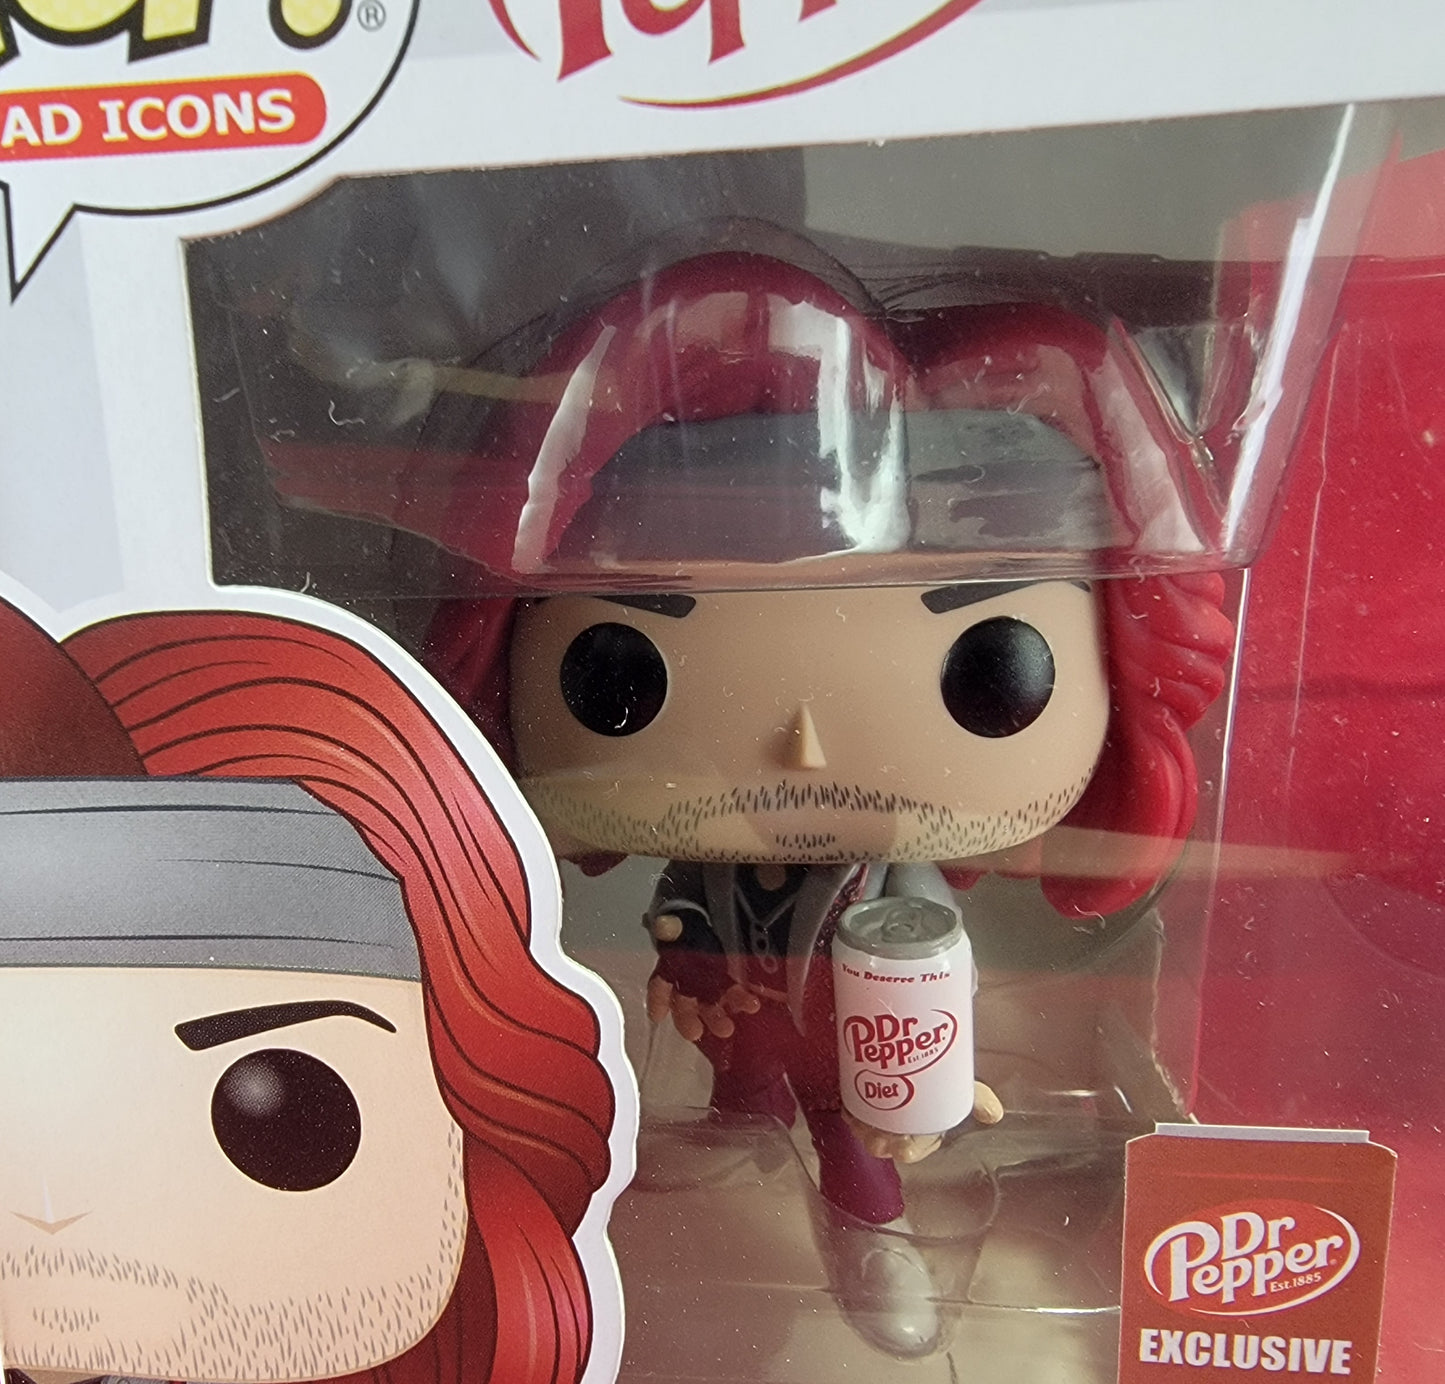 Lil' sweet, Dr. pepper exclusive funko # 79 (nib)
With pop protector